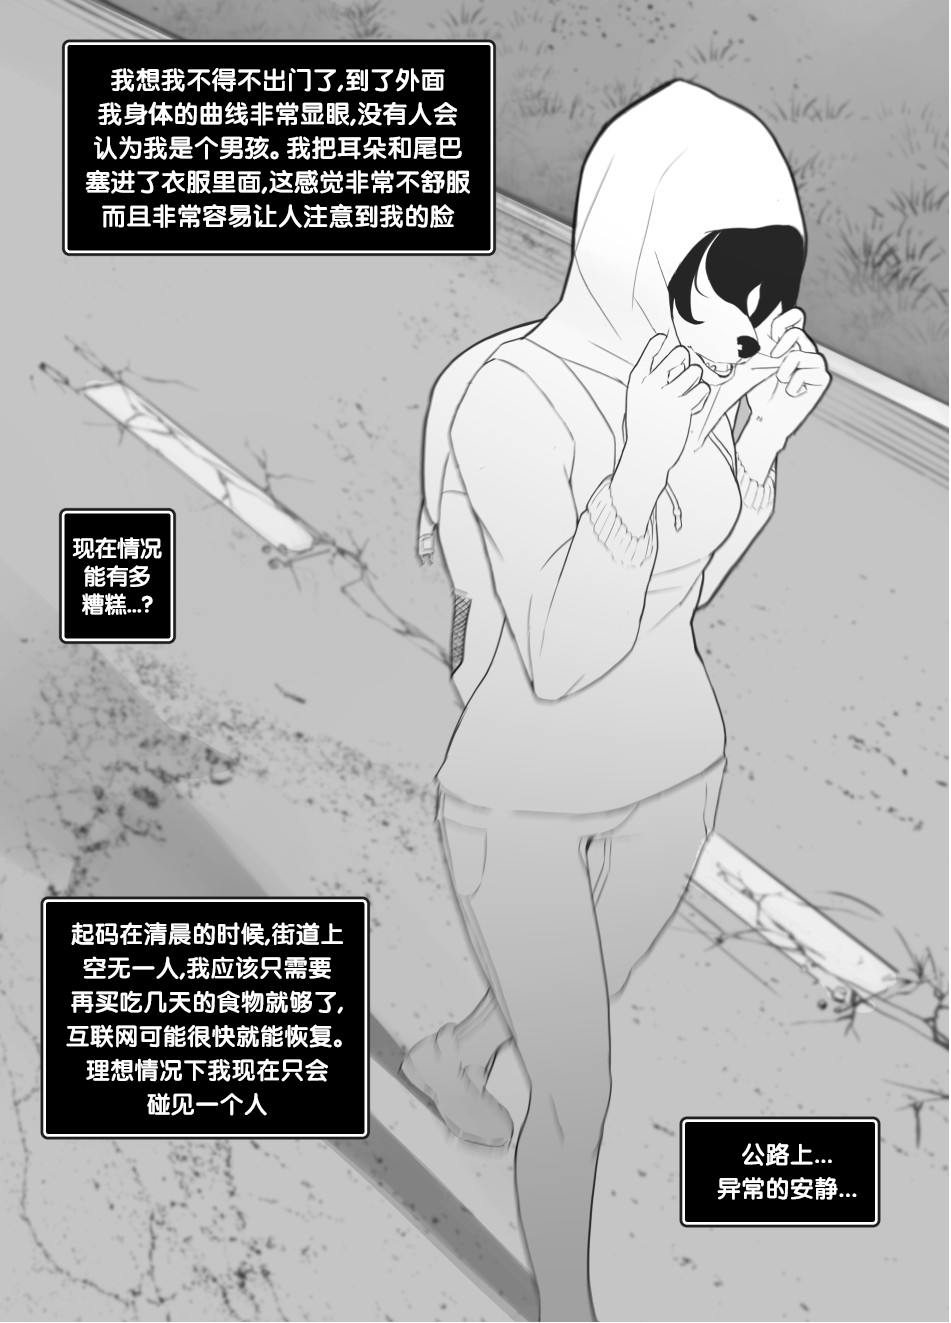 [Corablue] The Cell CH0 [Chinese] [梅水瓶汉化] 